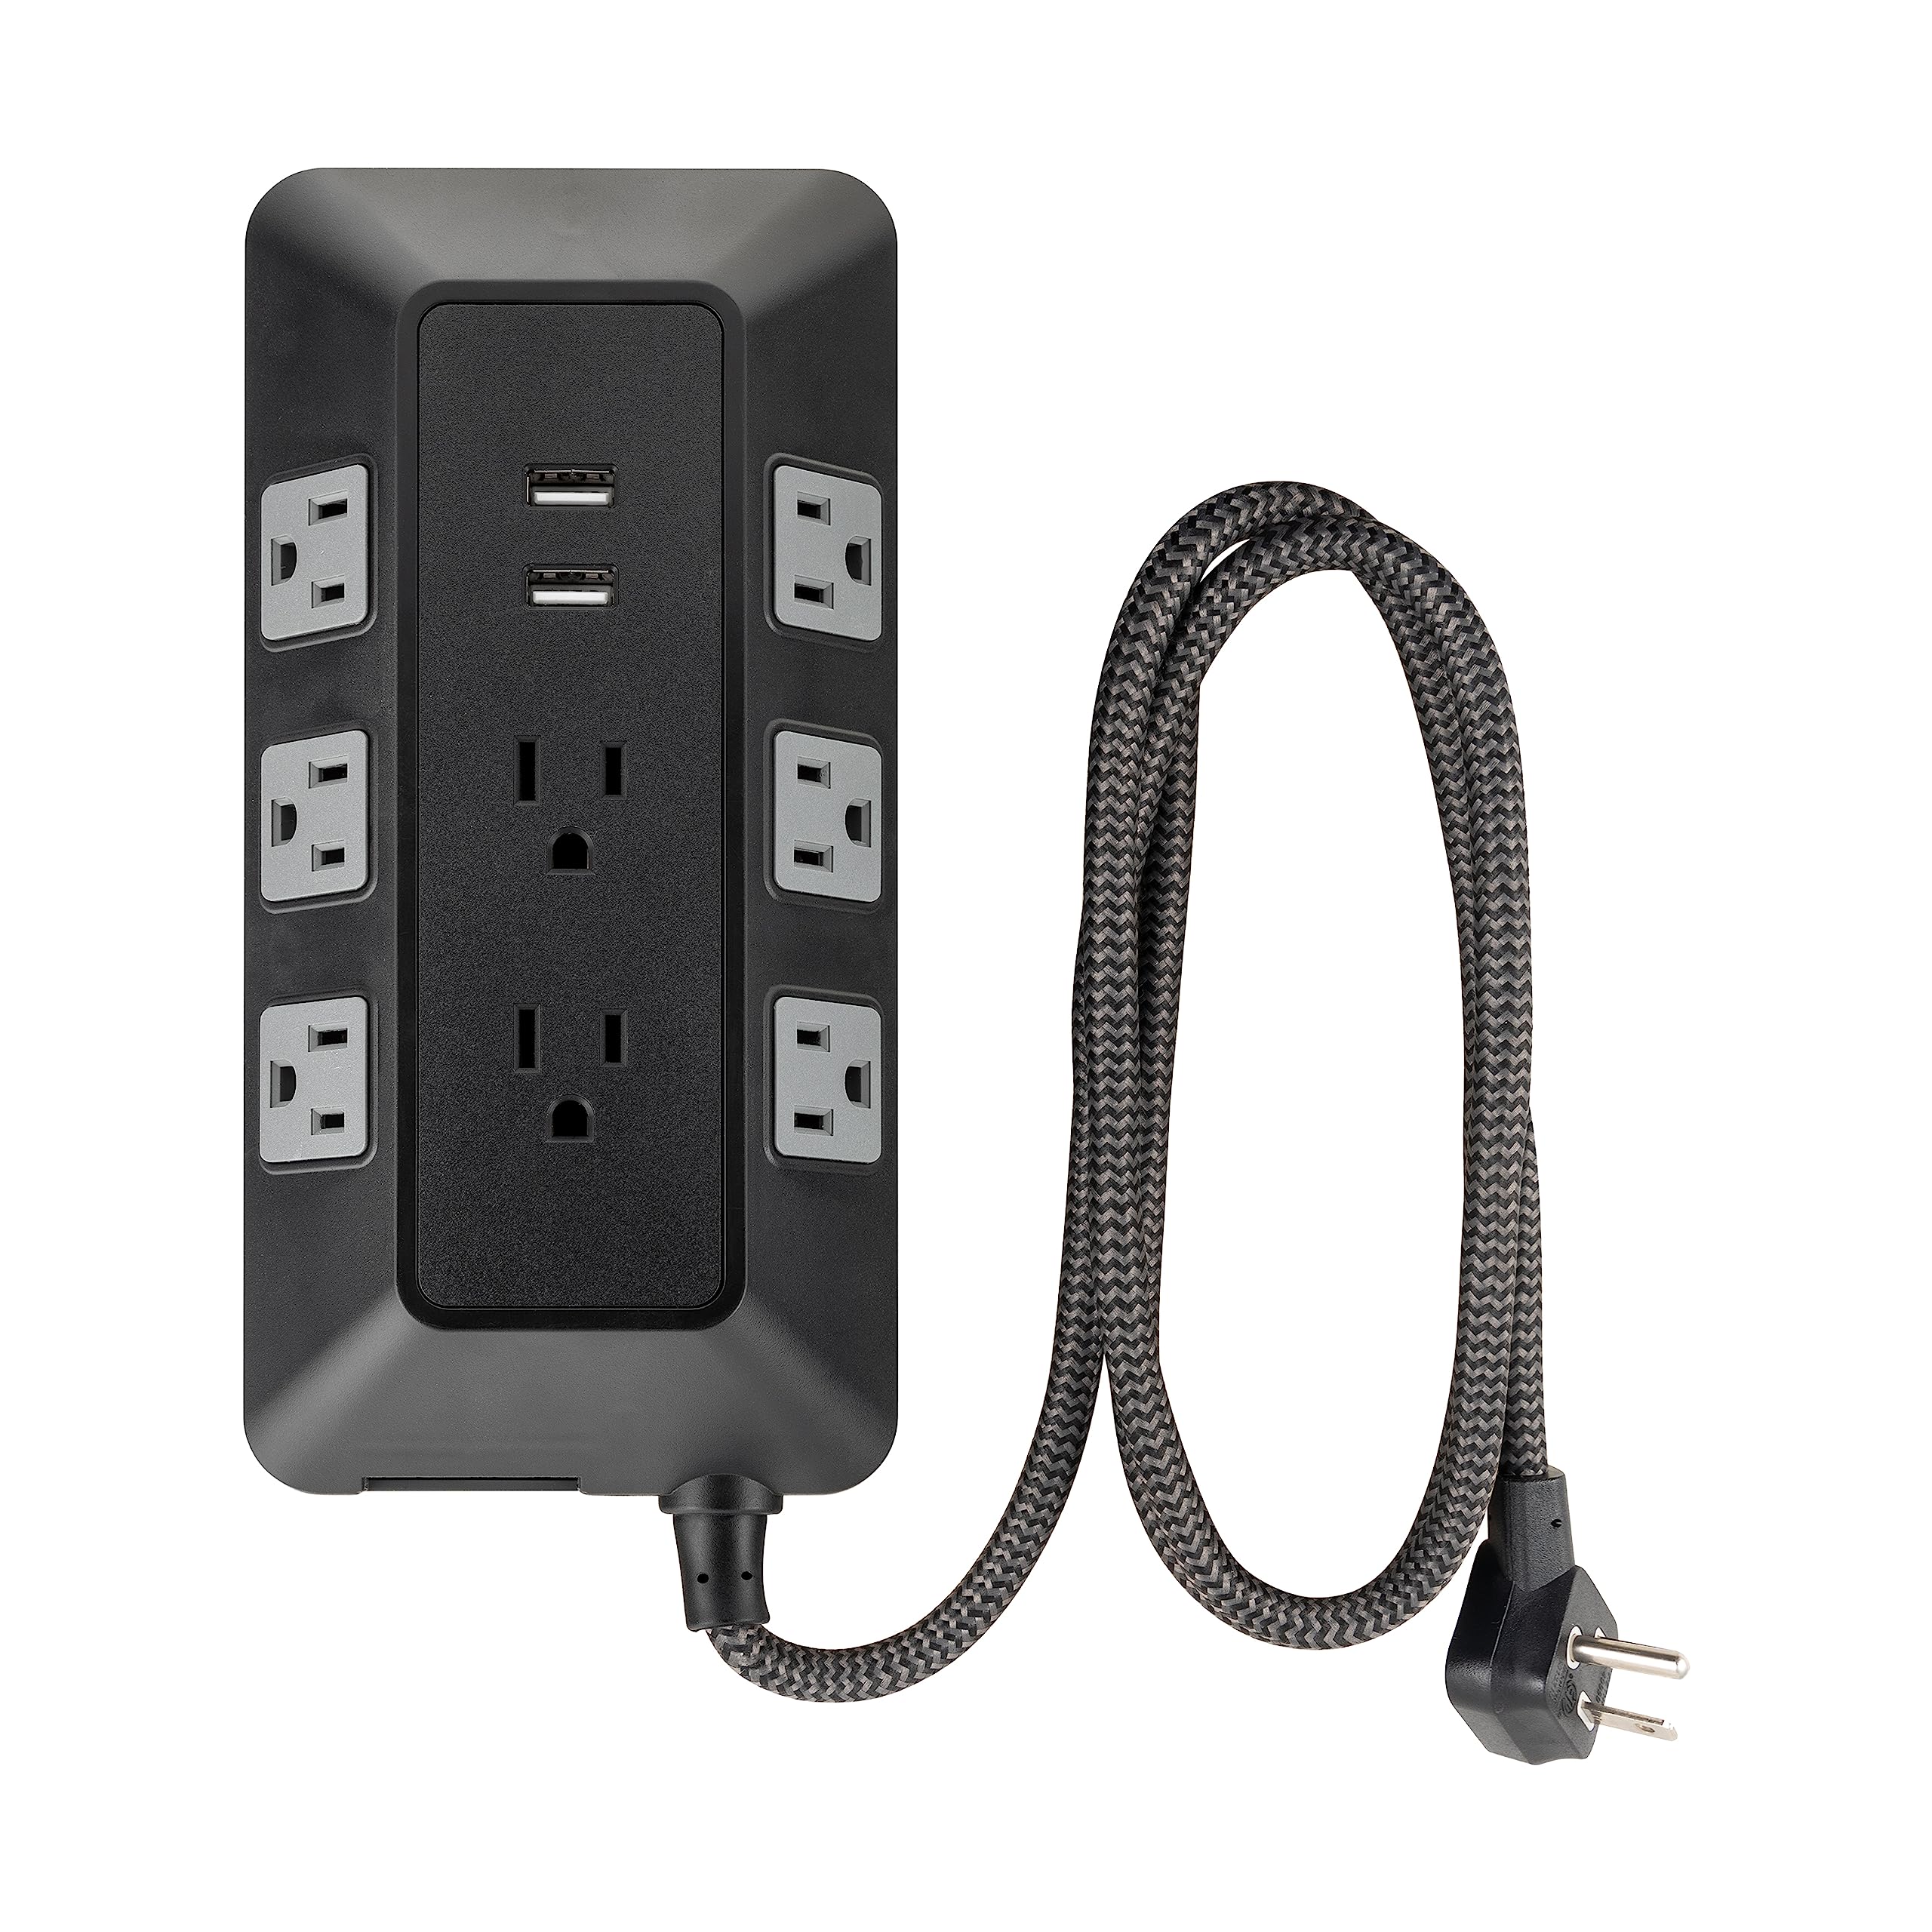 GE UltraPro Adapt 8-Outlet Surge Protector with USB Ports, 2 USB-A Ports, 2.4A, 3ft Braided Cord Power Strip Surge Protector, 1780 Joules, Black, 73776